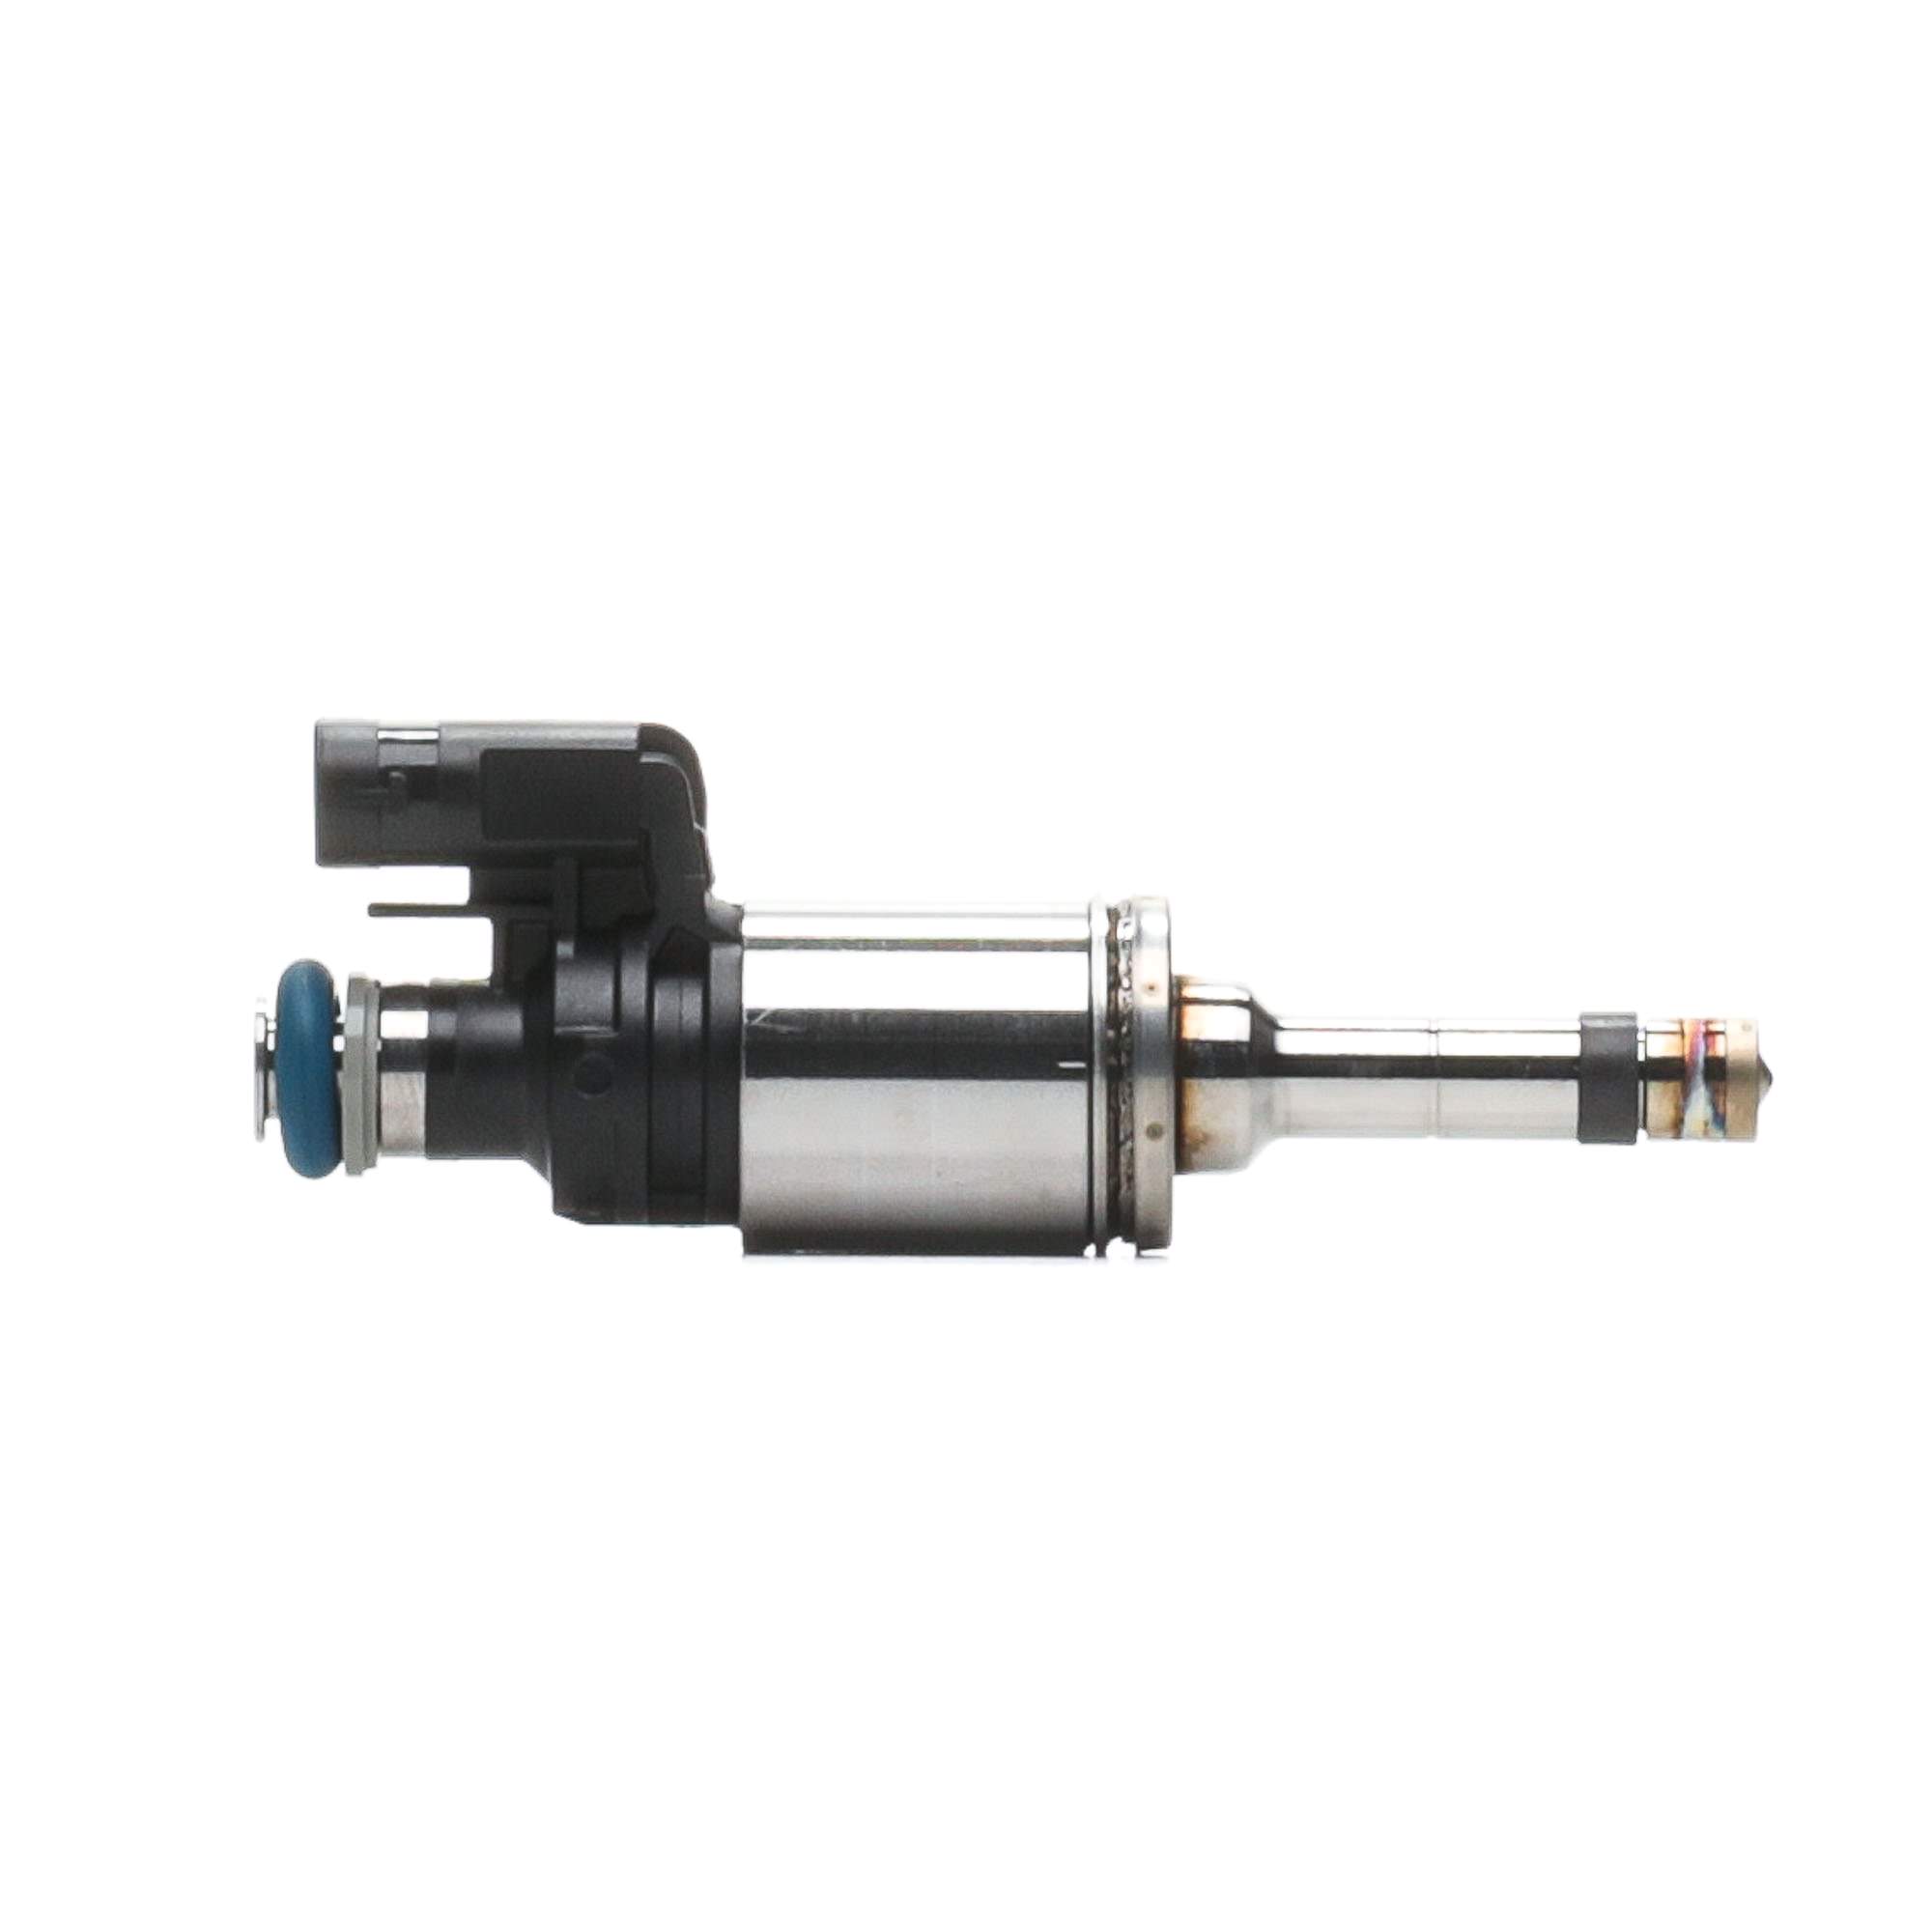 Original BOSCH HDEV-5-1 Injector 0 261 500 556 for FORD MONDEO